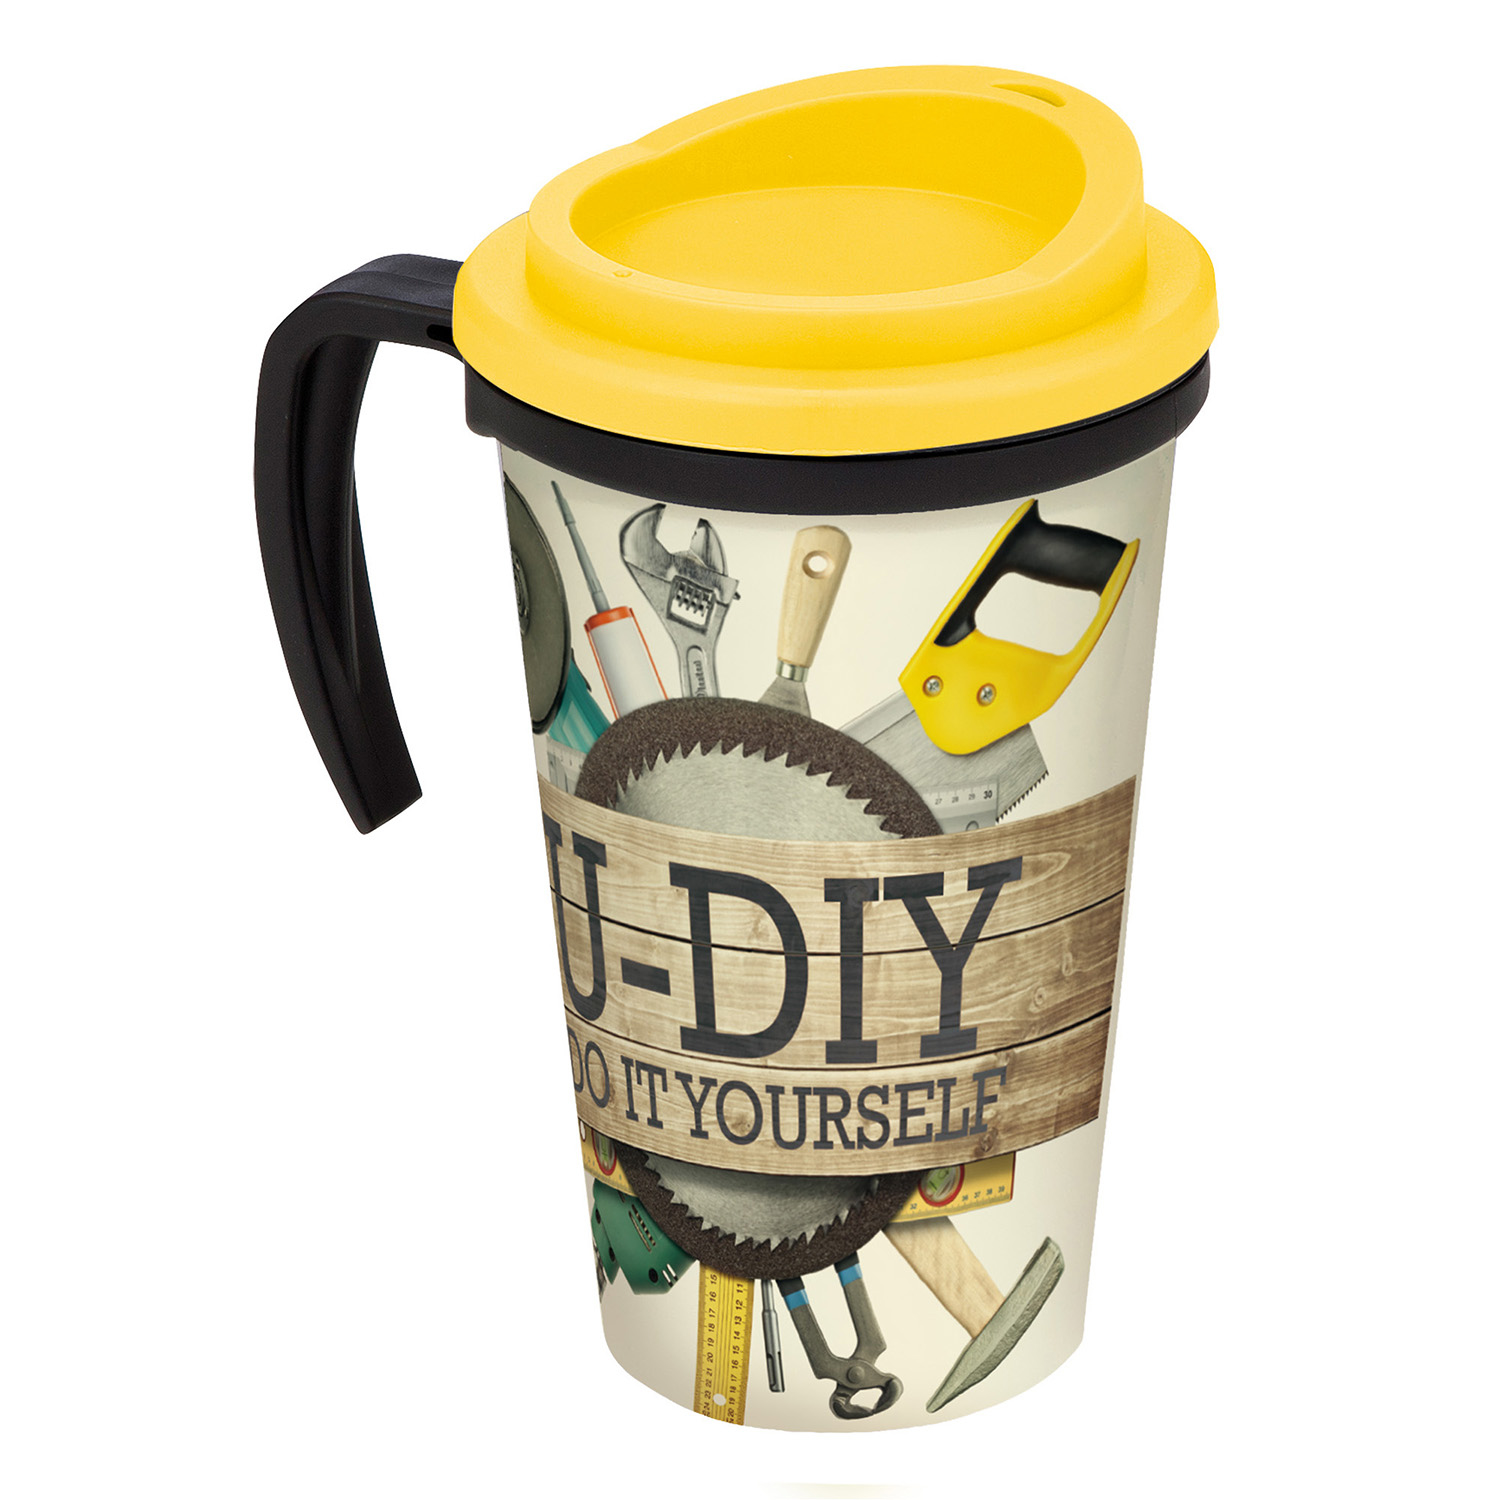 Grande Thermal Mug showing full colour print with yellow lid